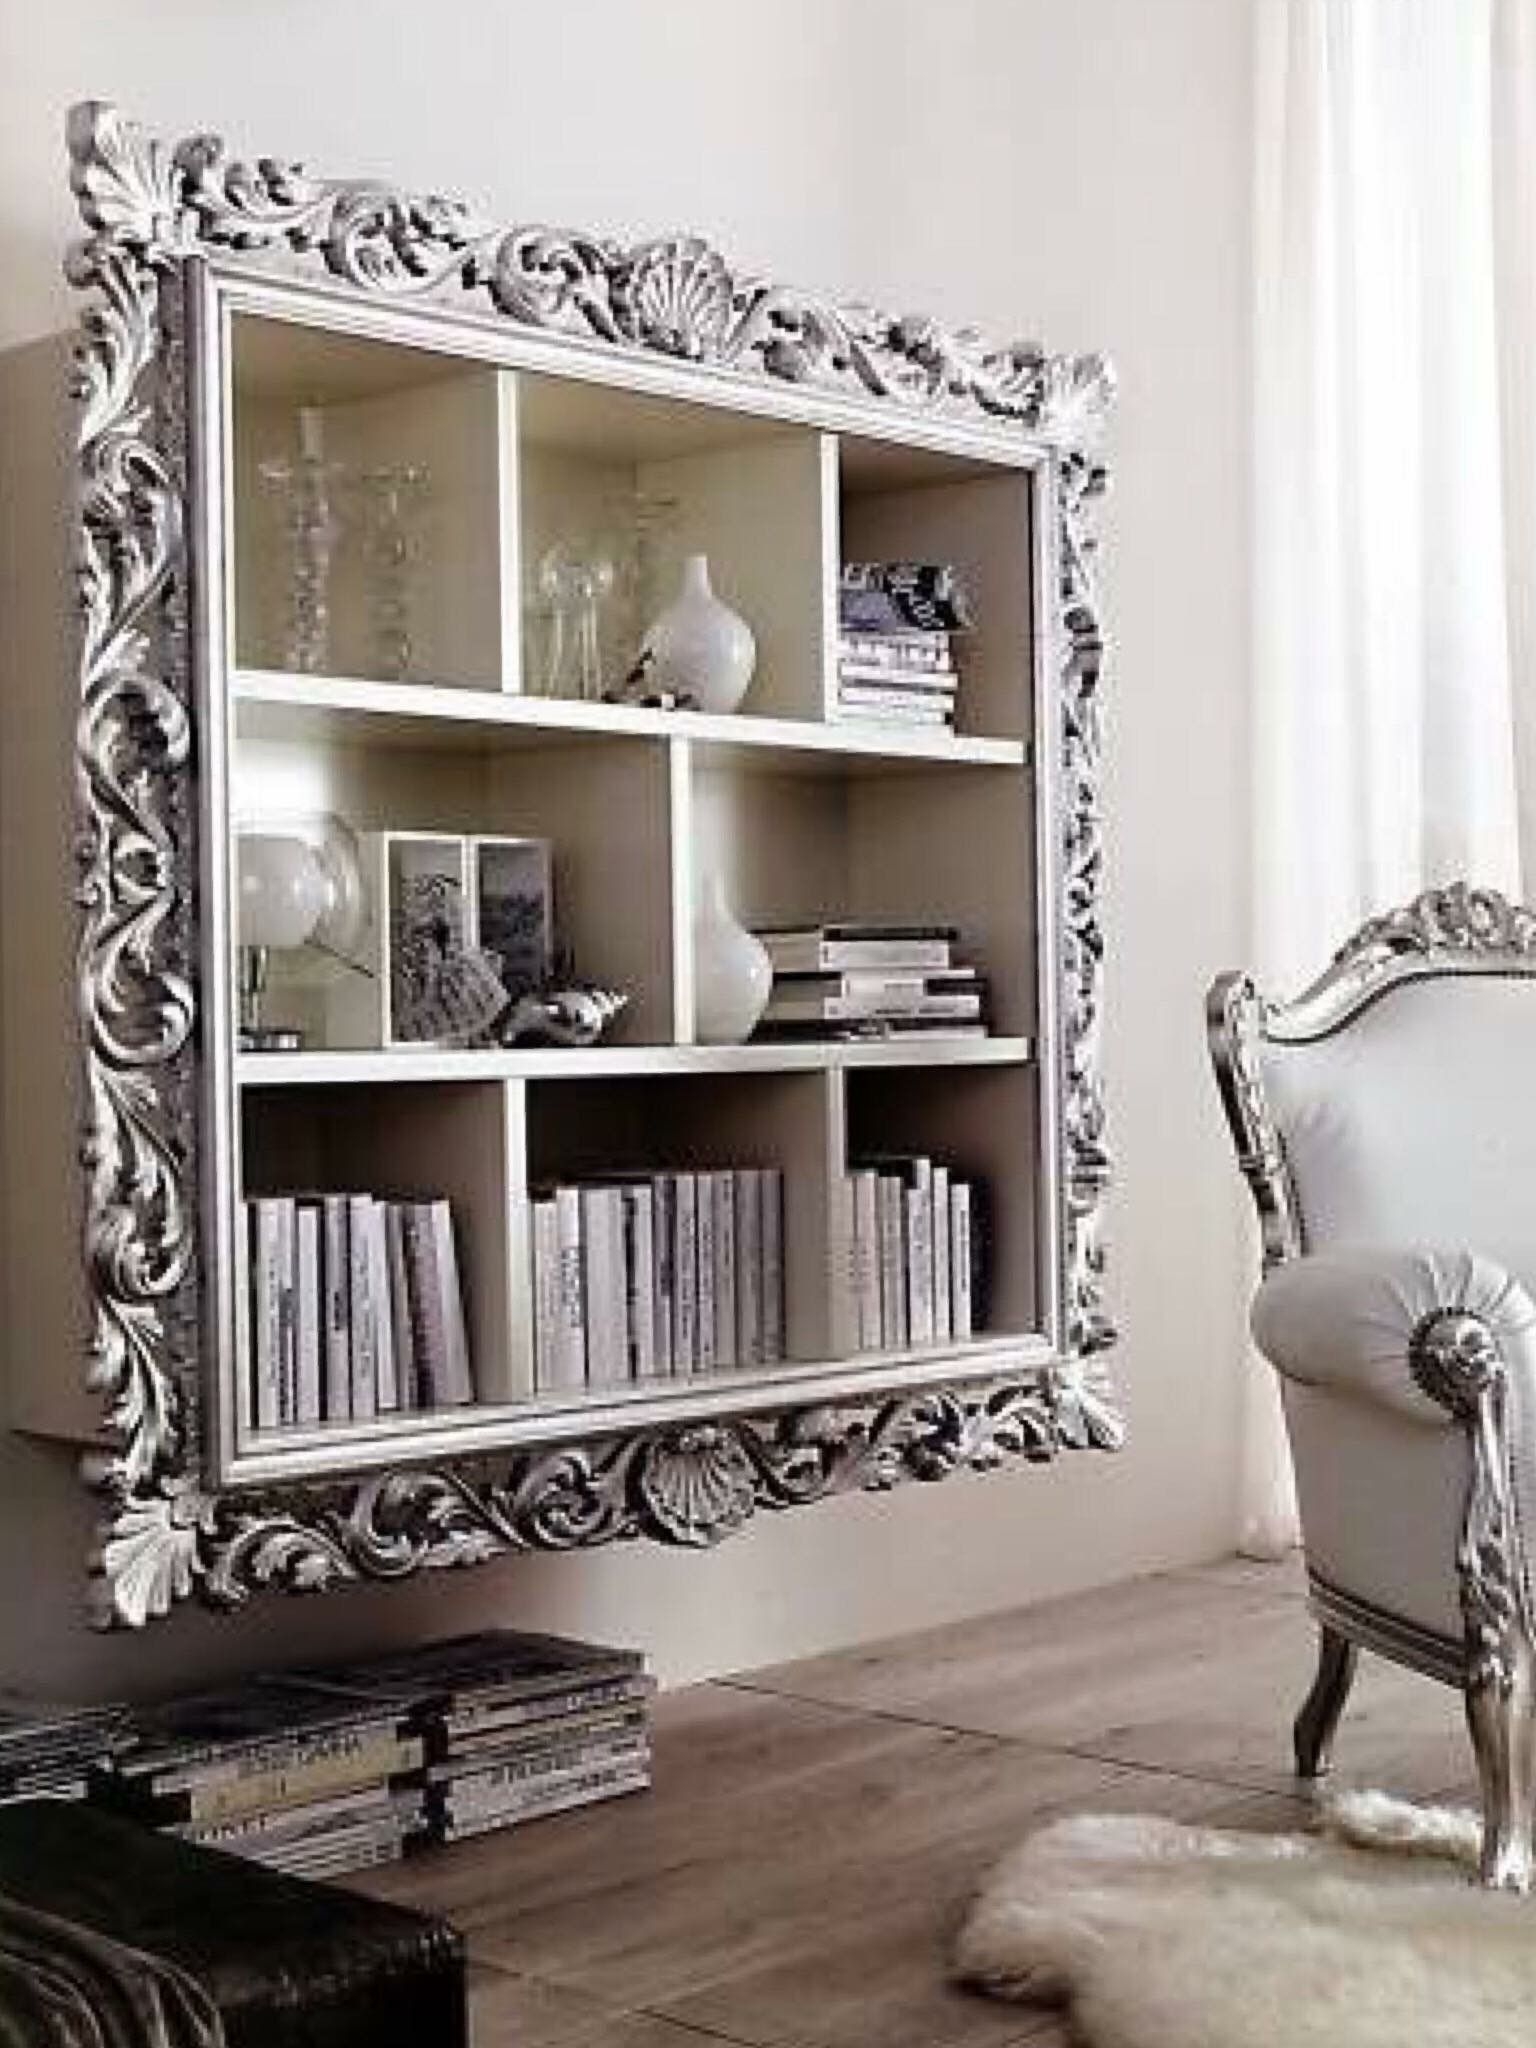 Frame an inexpensive wall shelf with ornate silver moulding it